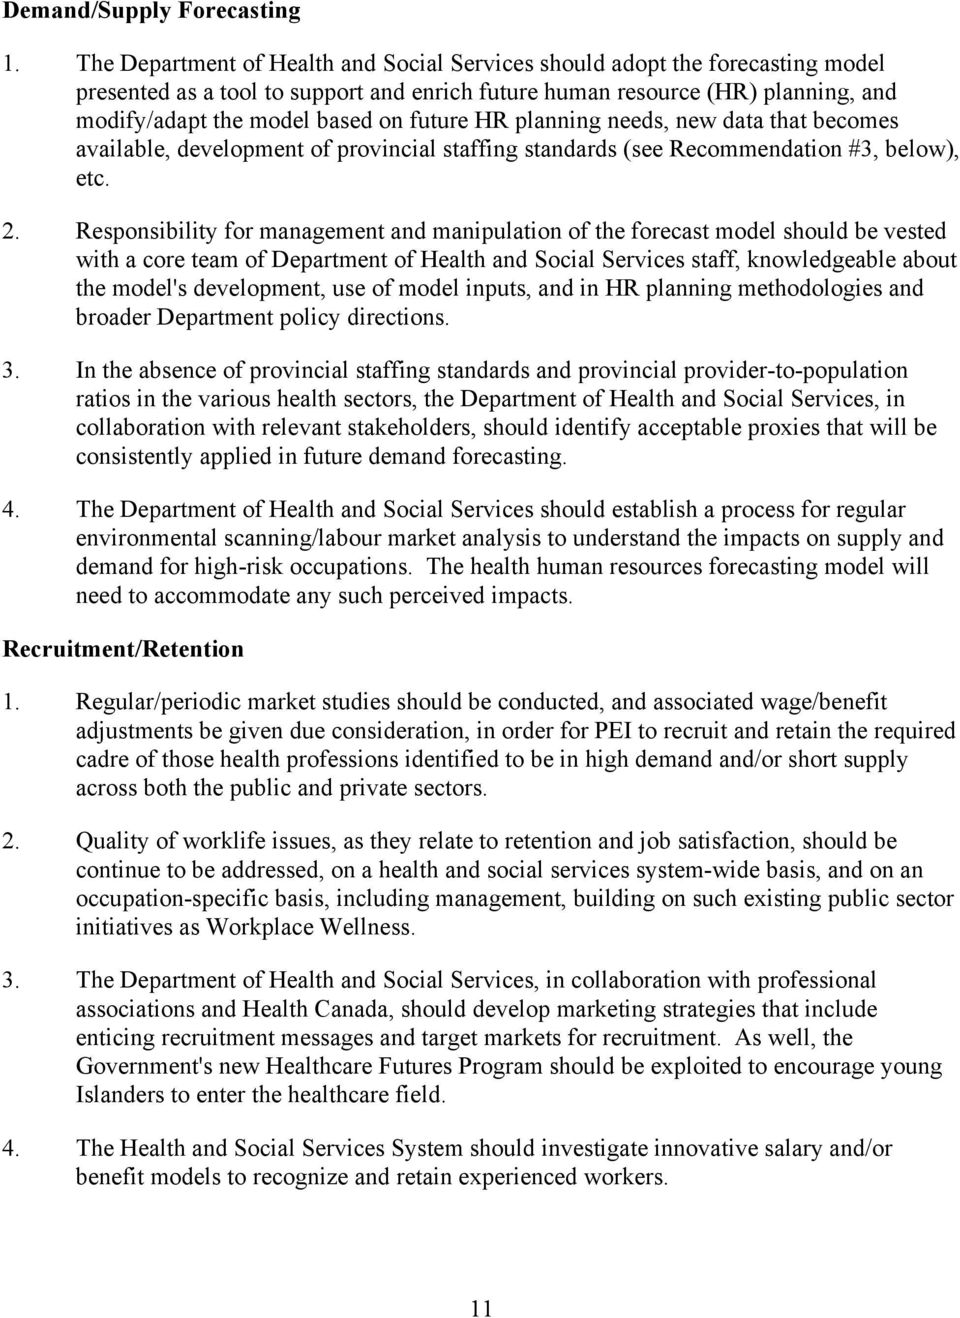 future HR planning needs, new data that becomes available, development of provincial staffing standards (see Recommendation #3, below), etc. 2.